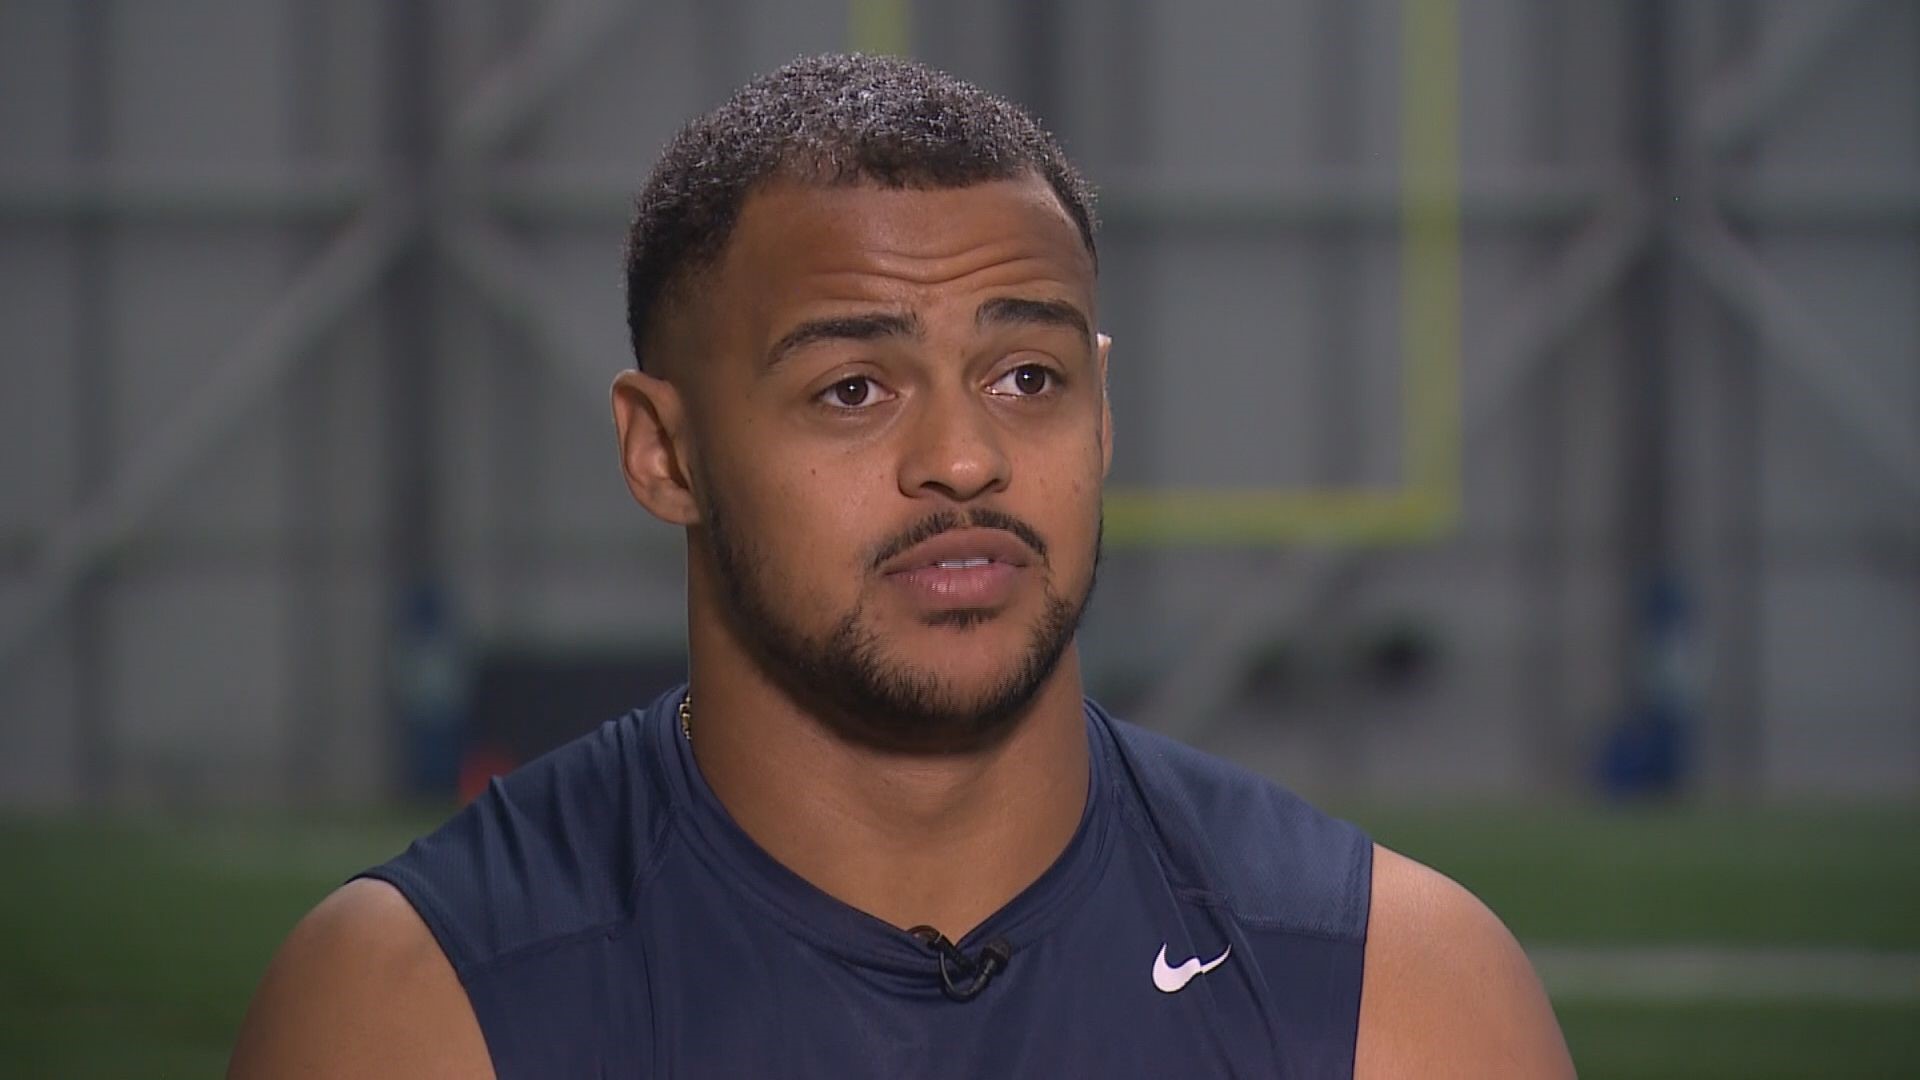 Seahawks tight end Noah Fant sits down with Paul Silvi to talk about this season’s offense, his workout routine and his interest in the medical field.